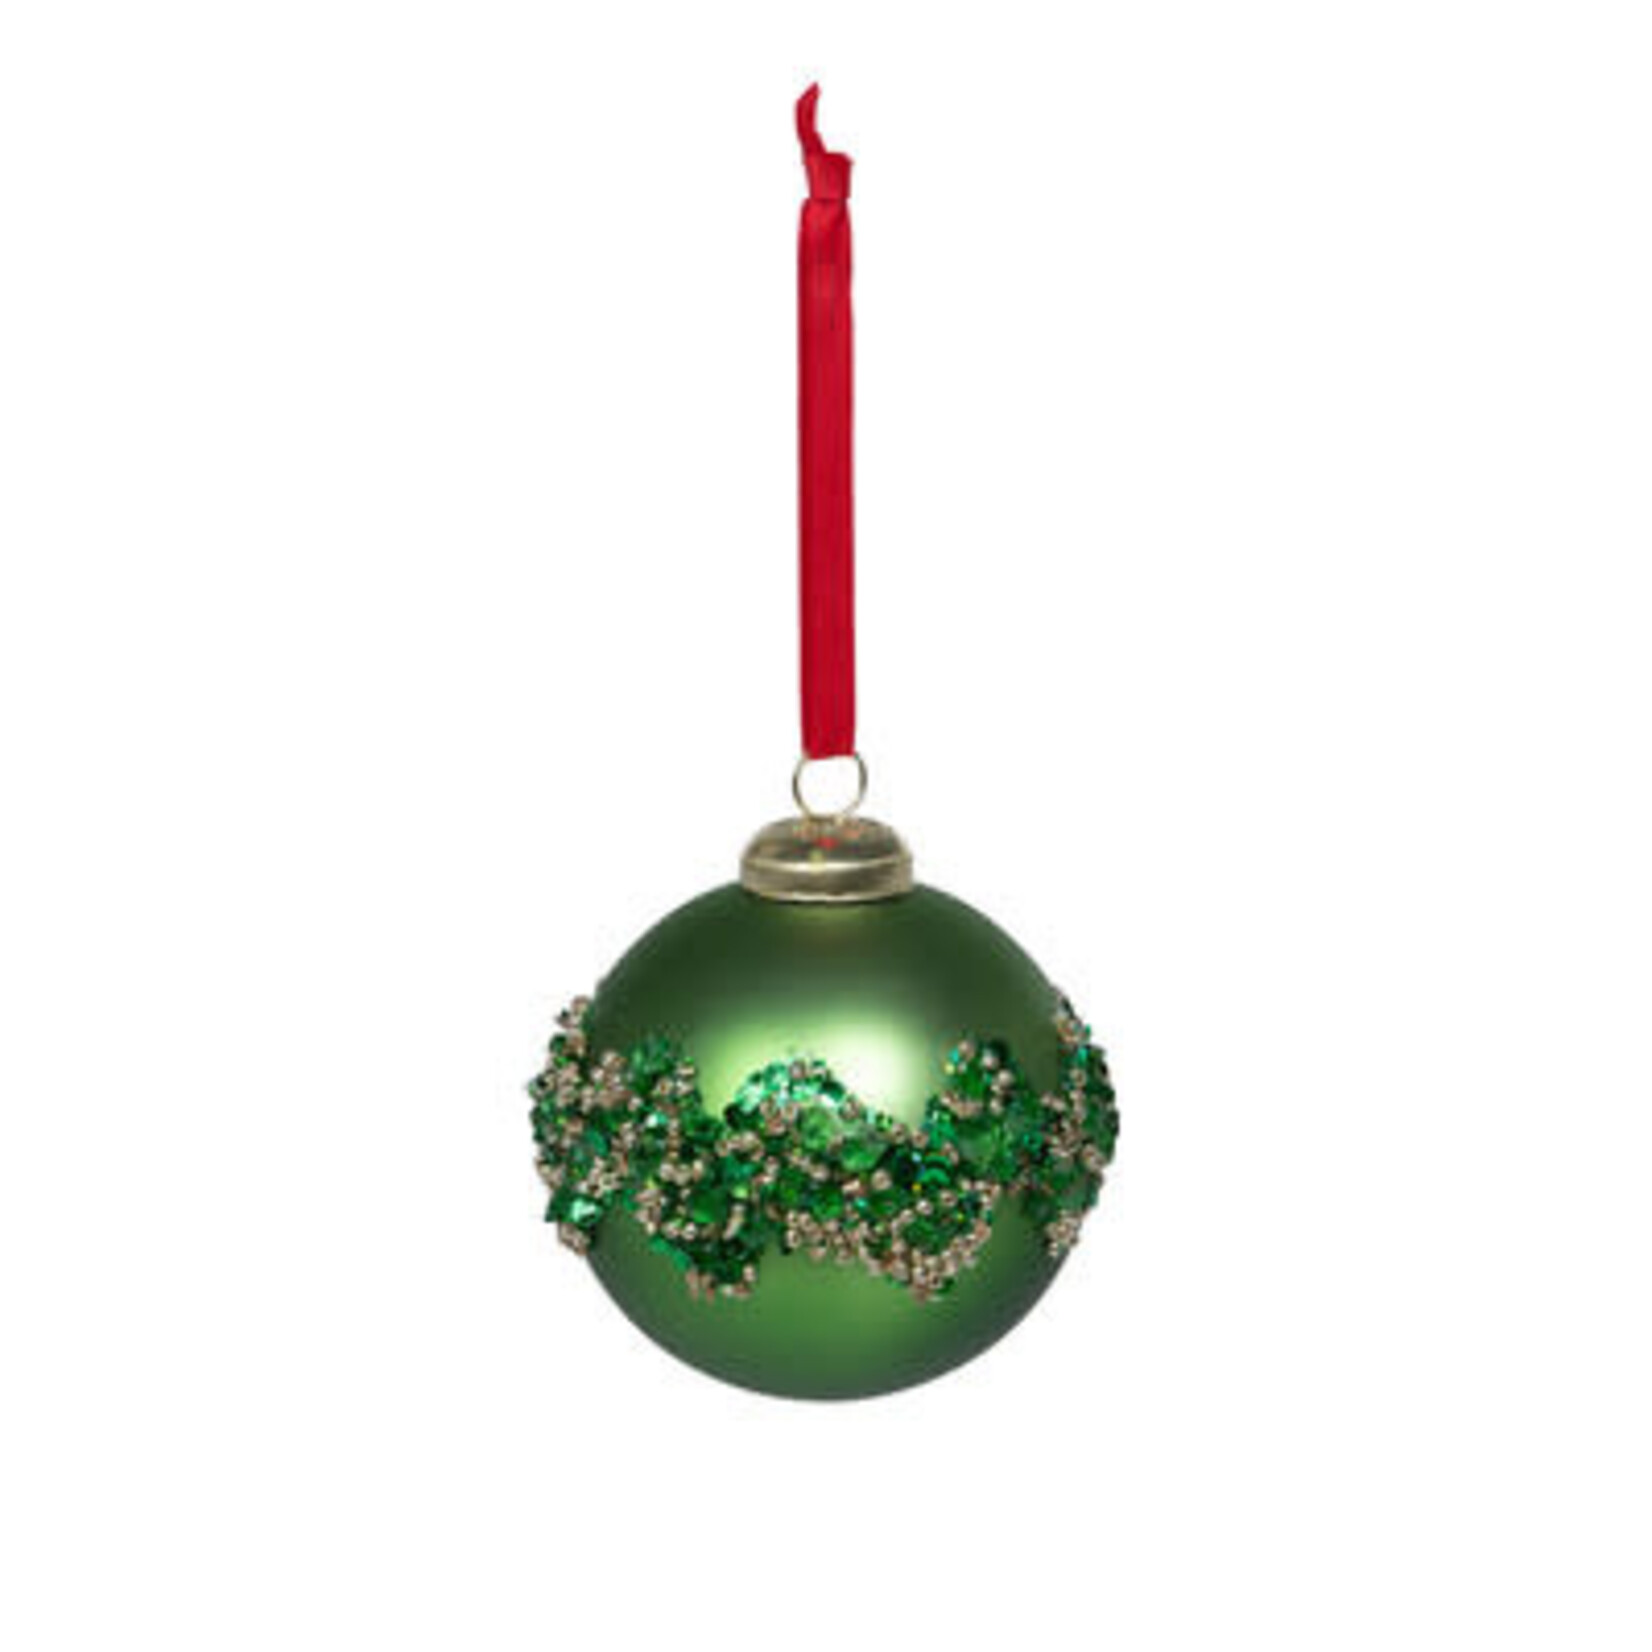 Park Hill Bejeweled Glass Ball Ornament